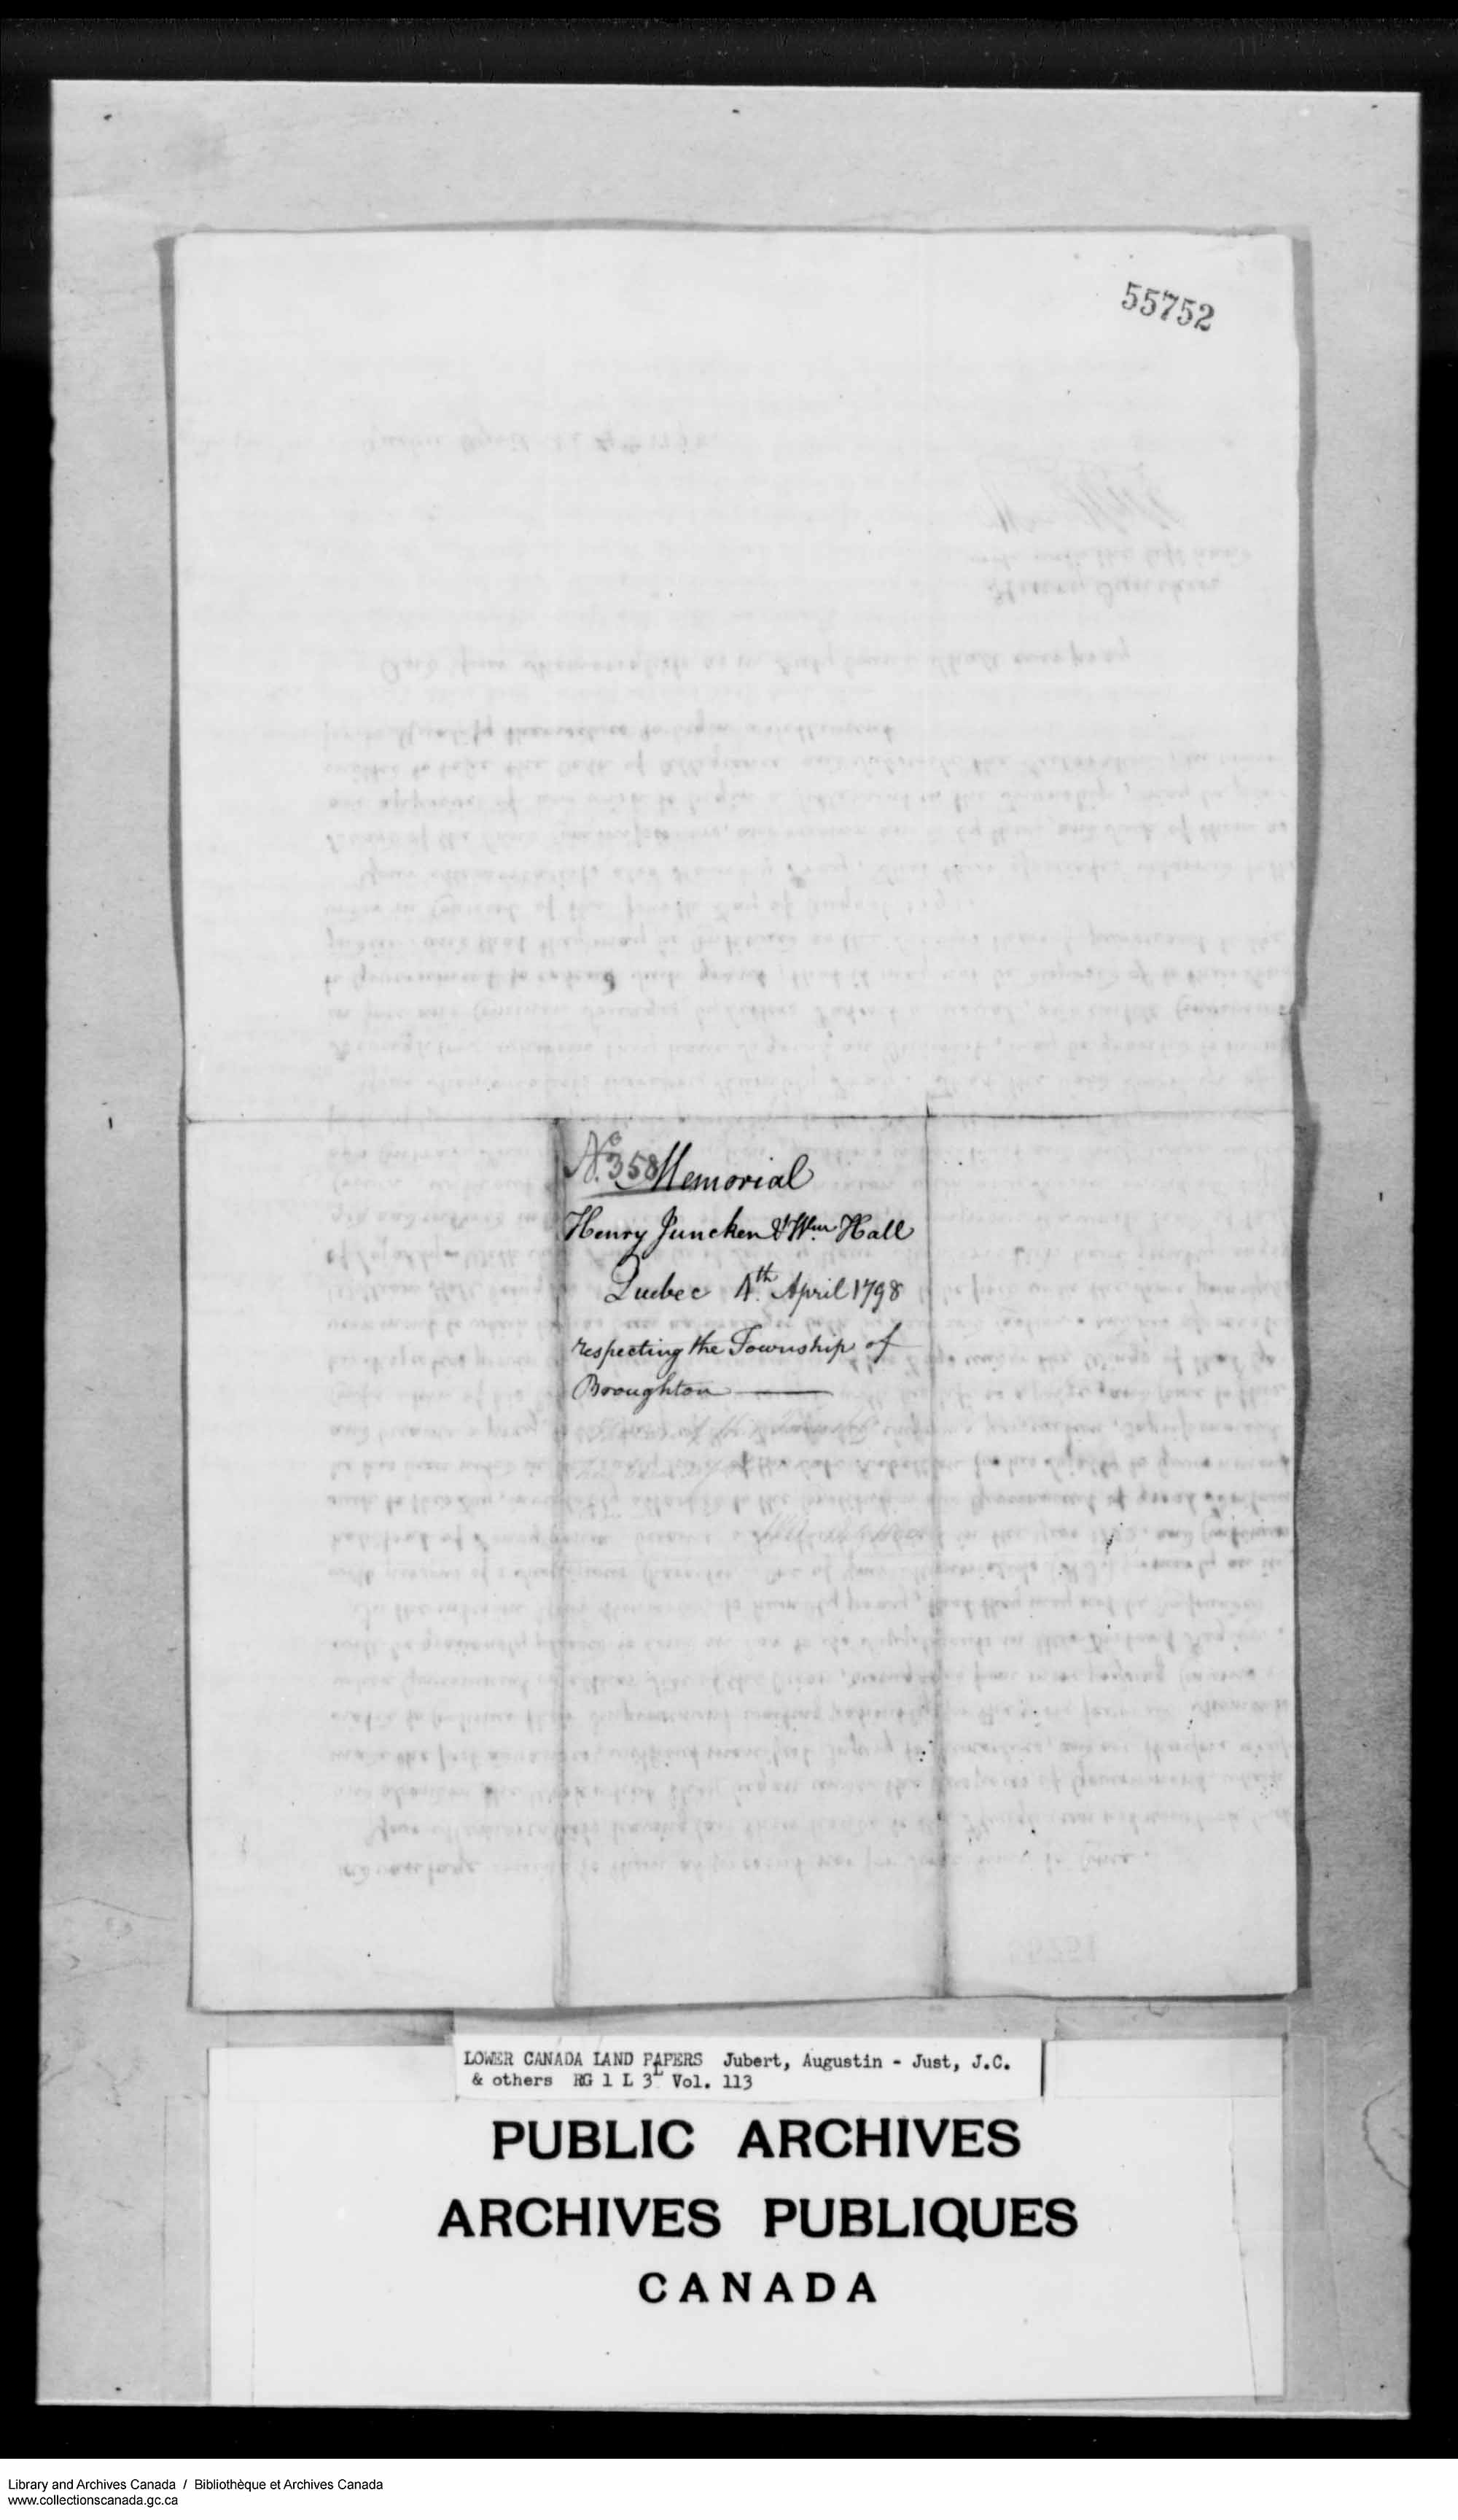 Digitized page of  for Image No.: e008700240